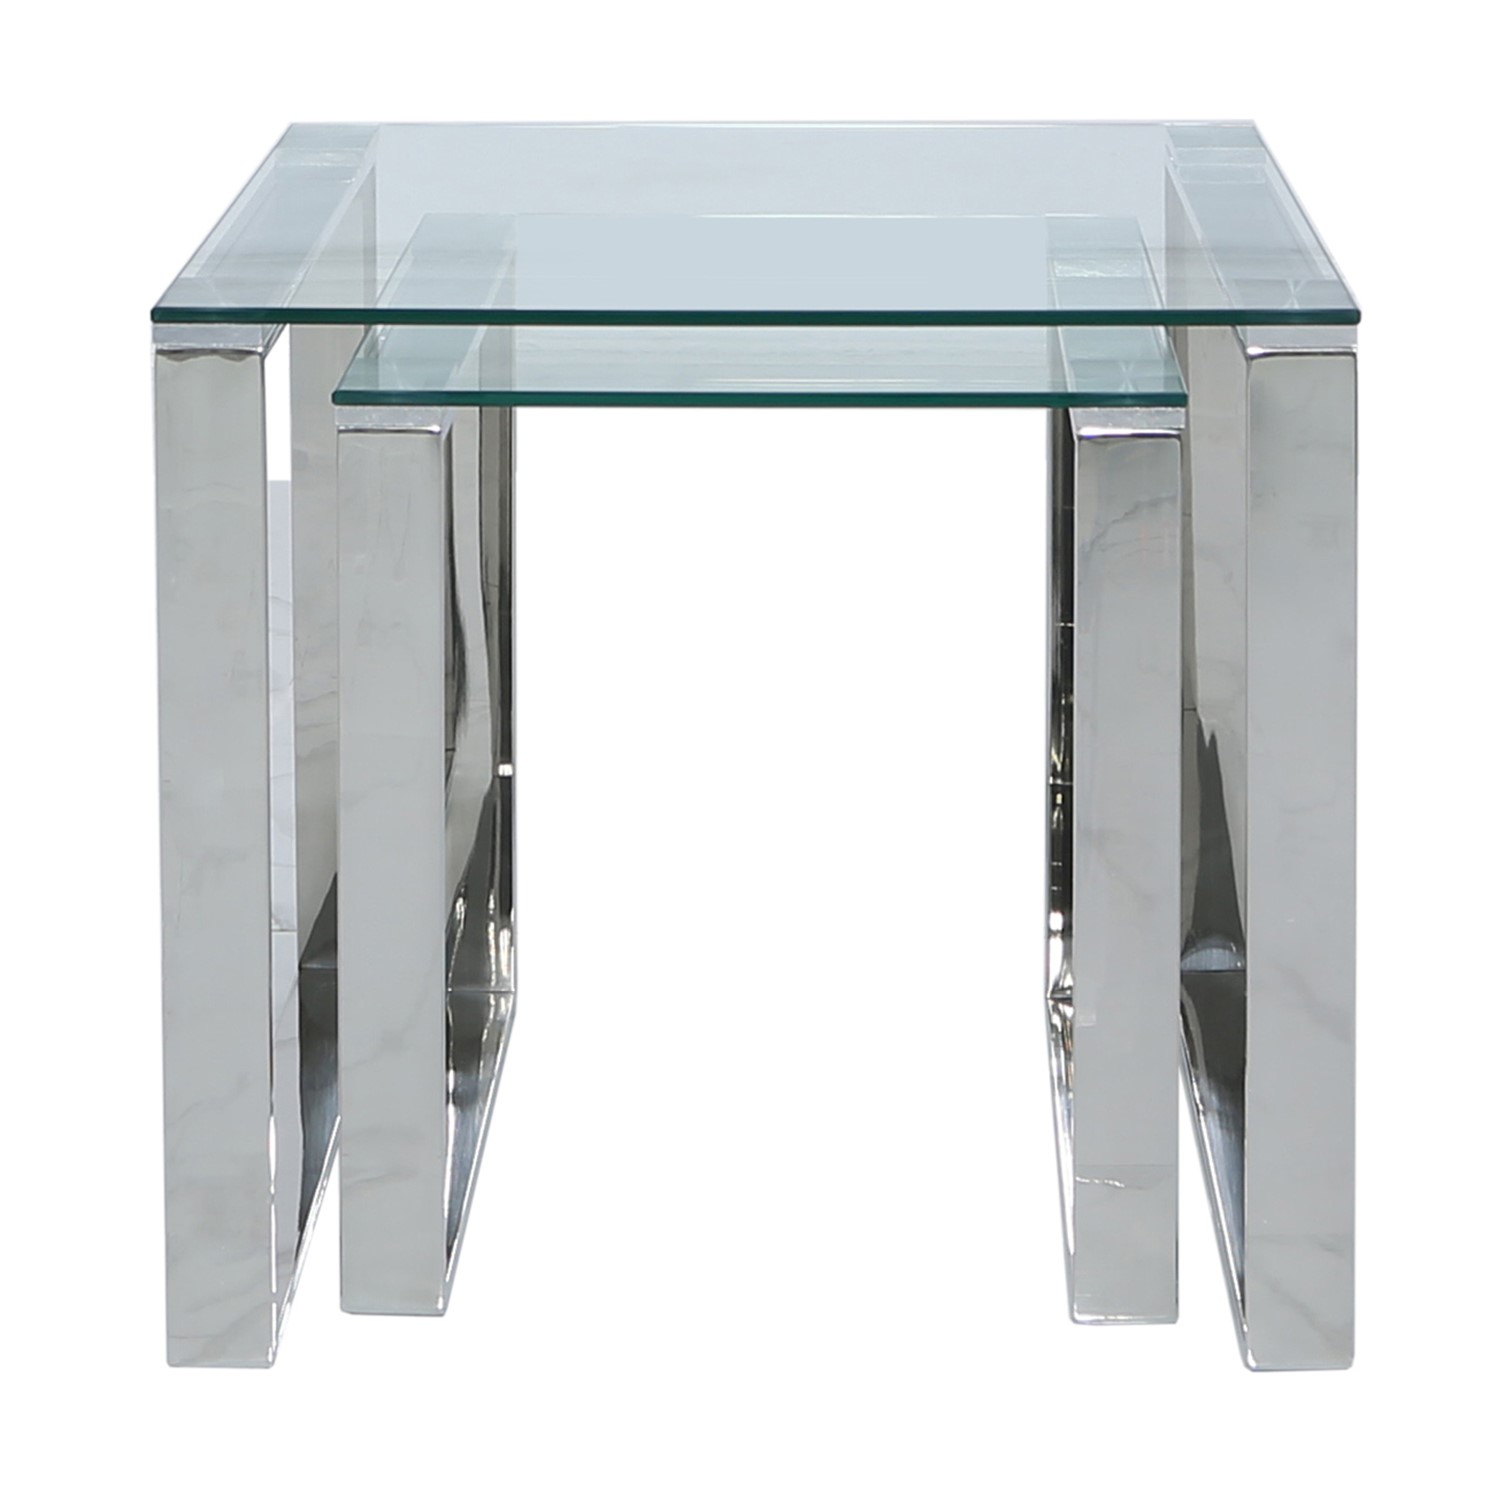 Photo of Nest of 2 tables in stainless steel with glass top